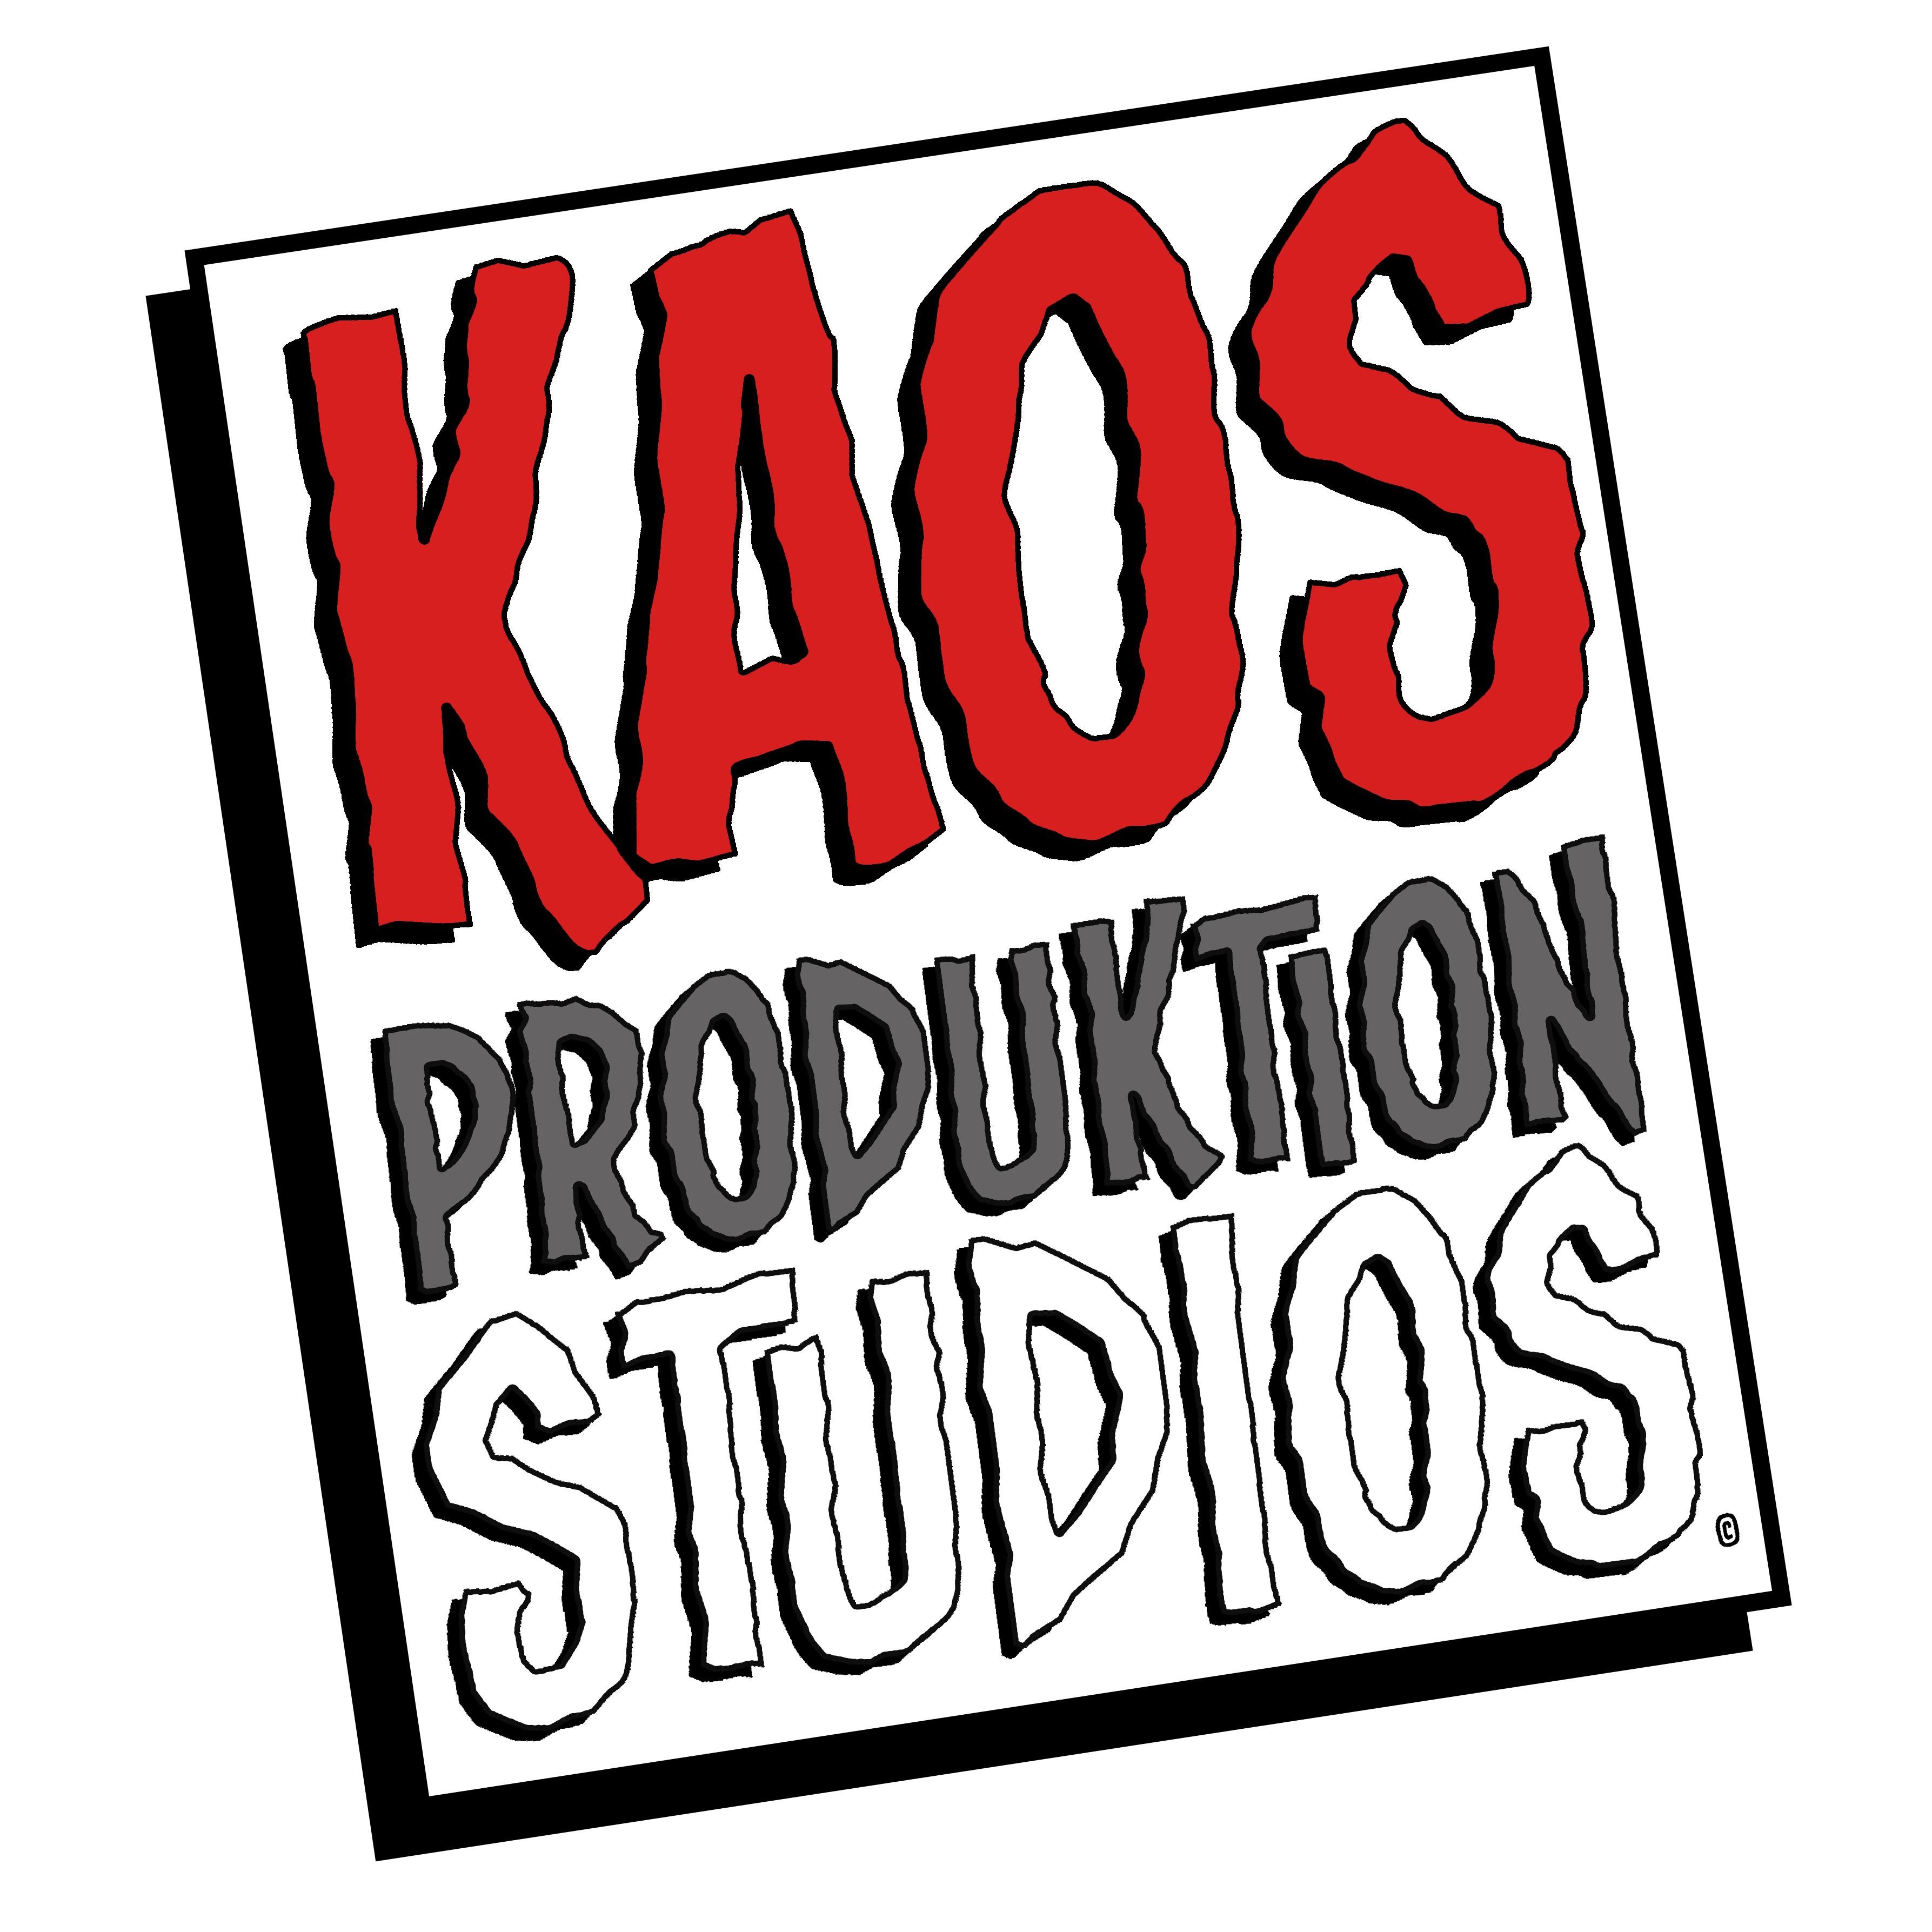 Kaos Produktion Studios is a virtual illustration and design company based in Cape Town. We specialize in comics, logos, business cards, caricatures etc.